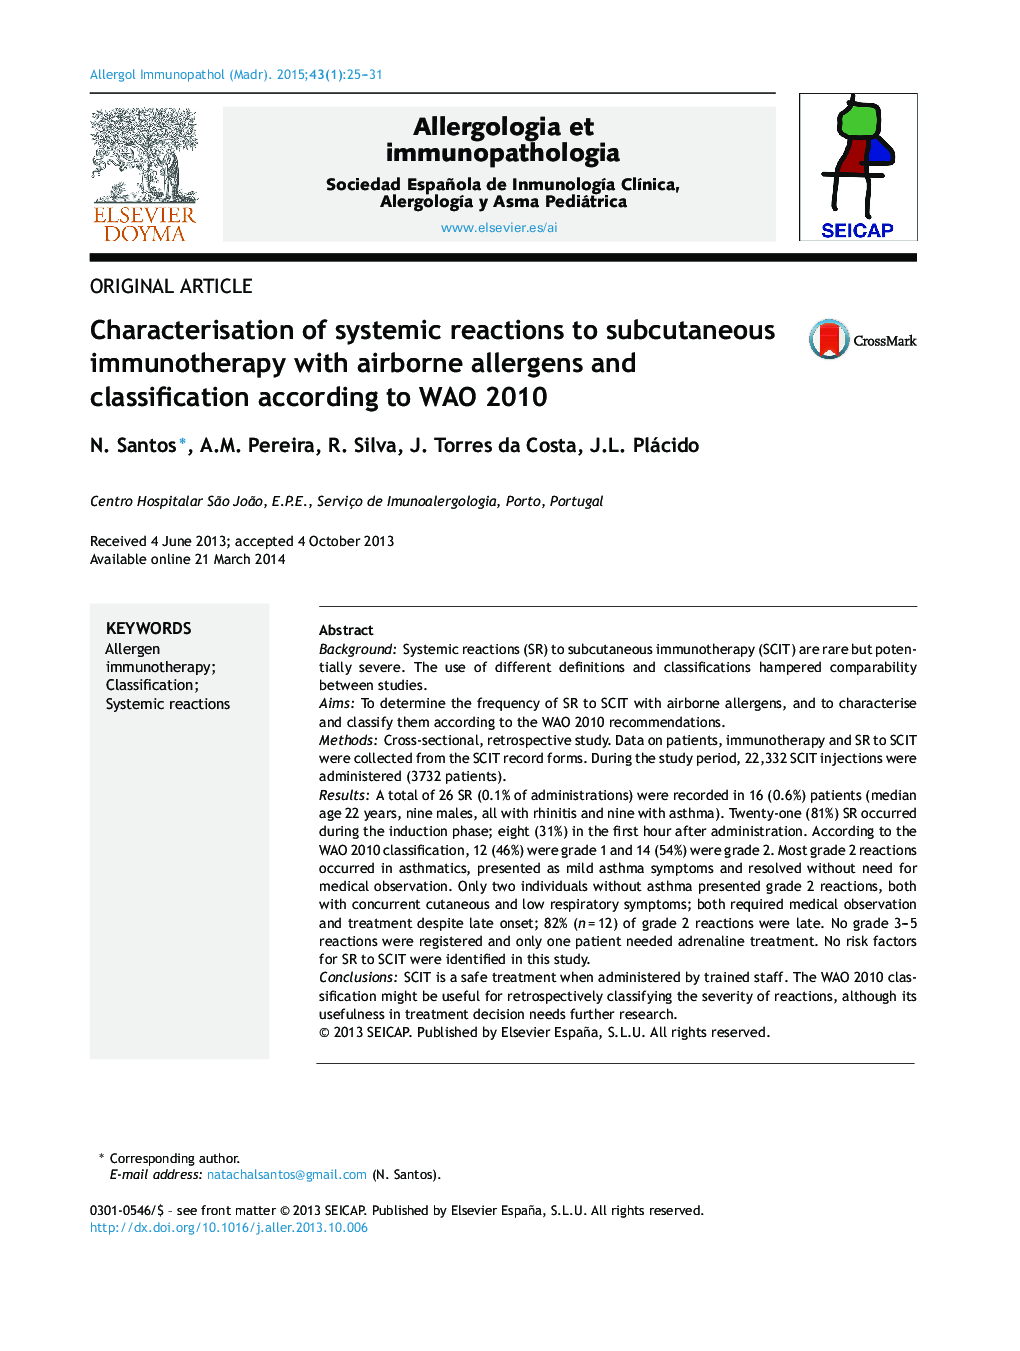 Characterisation of systemic reactions to subcutaneous immunotherapy with airborne allergens and classification according to WAO 2010